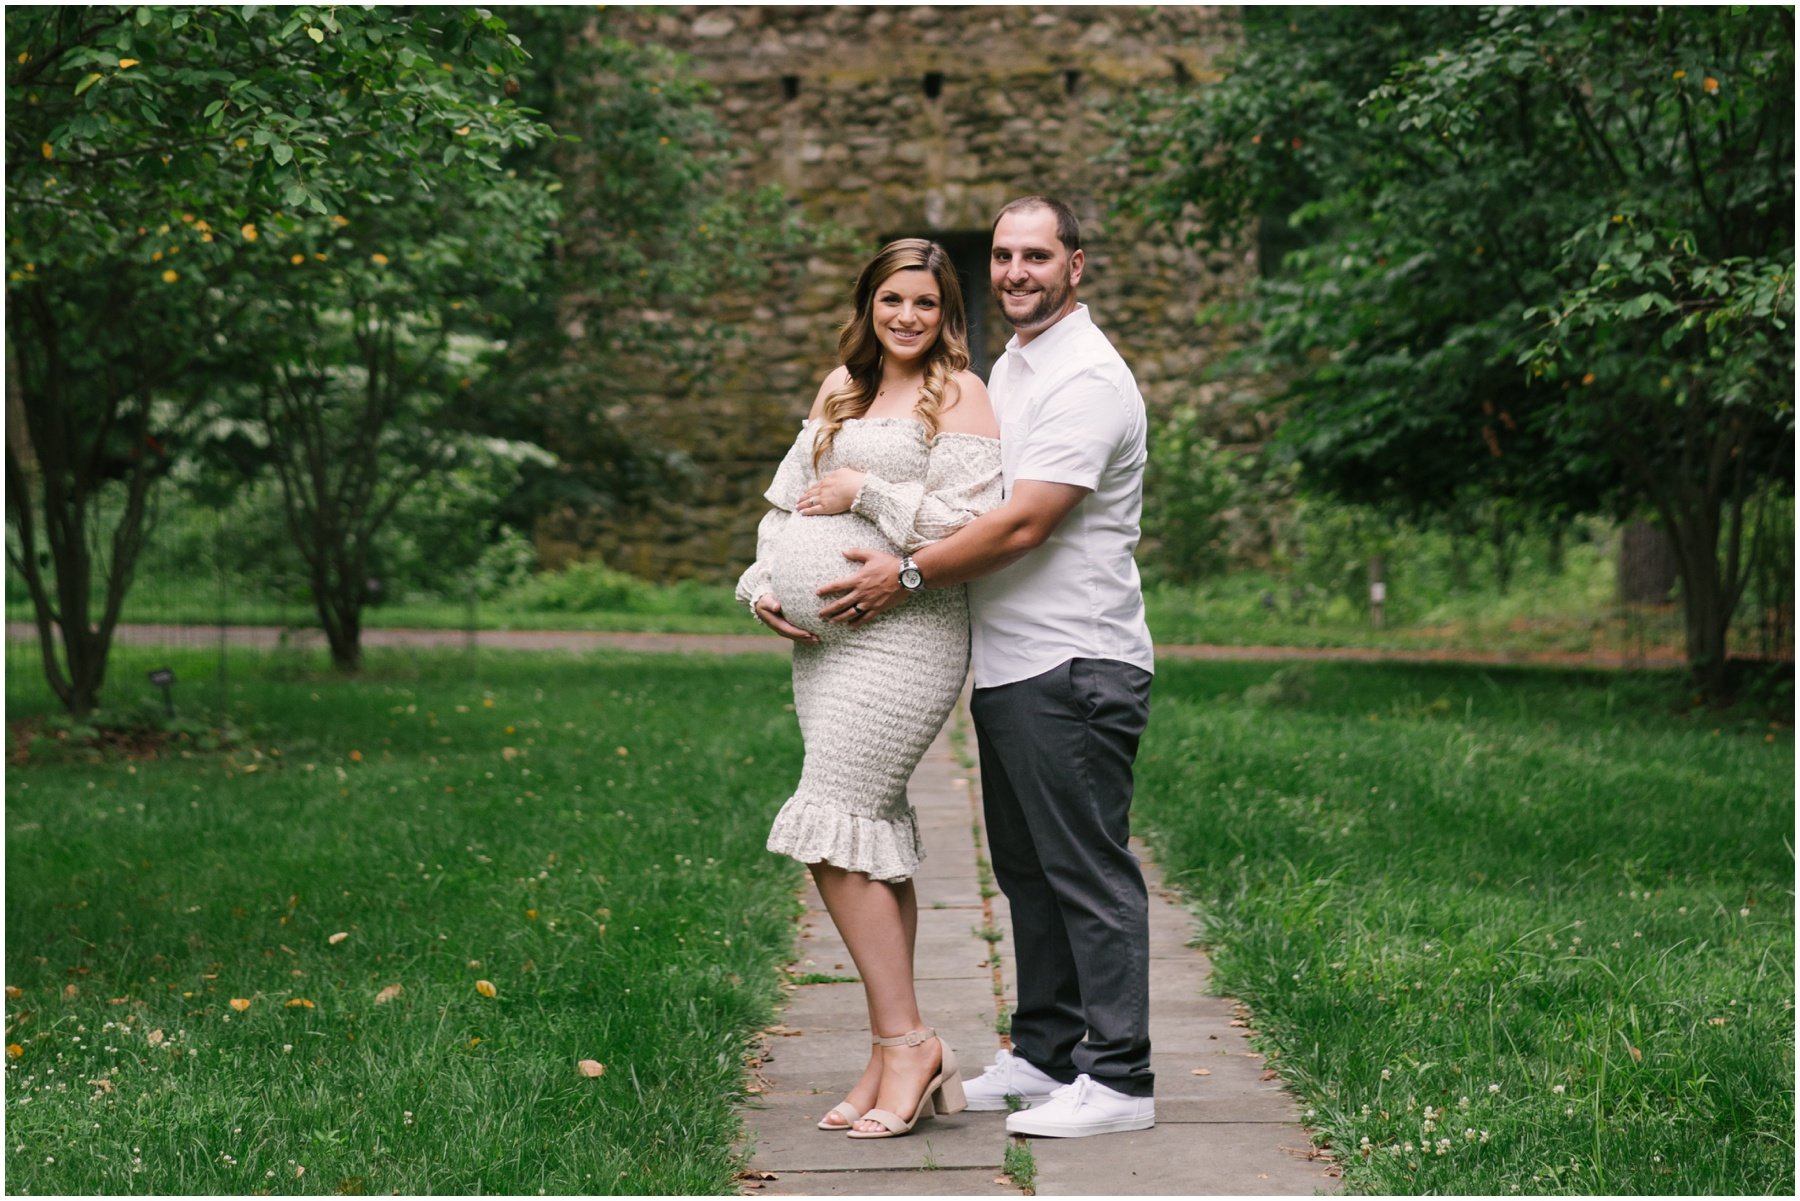 Man standing behind woman with hands on pregnant belly during maternity session | NKB Photo